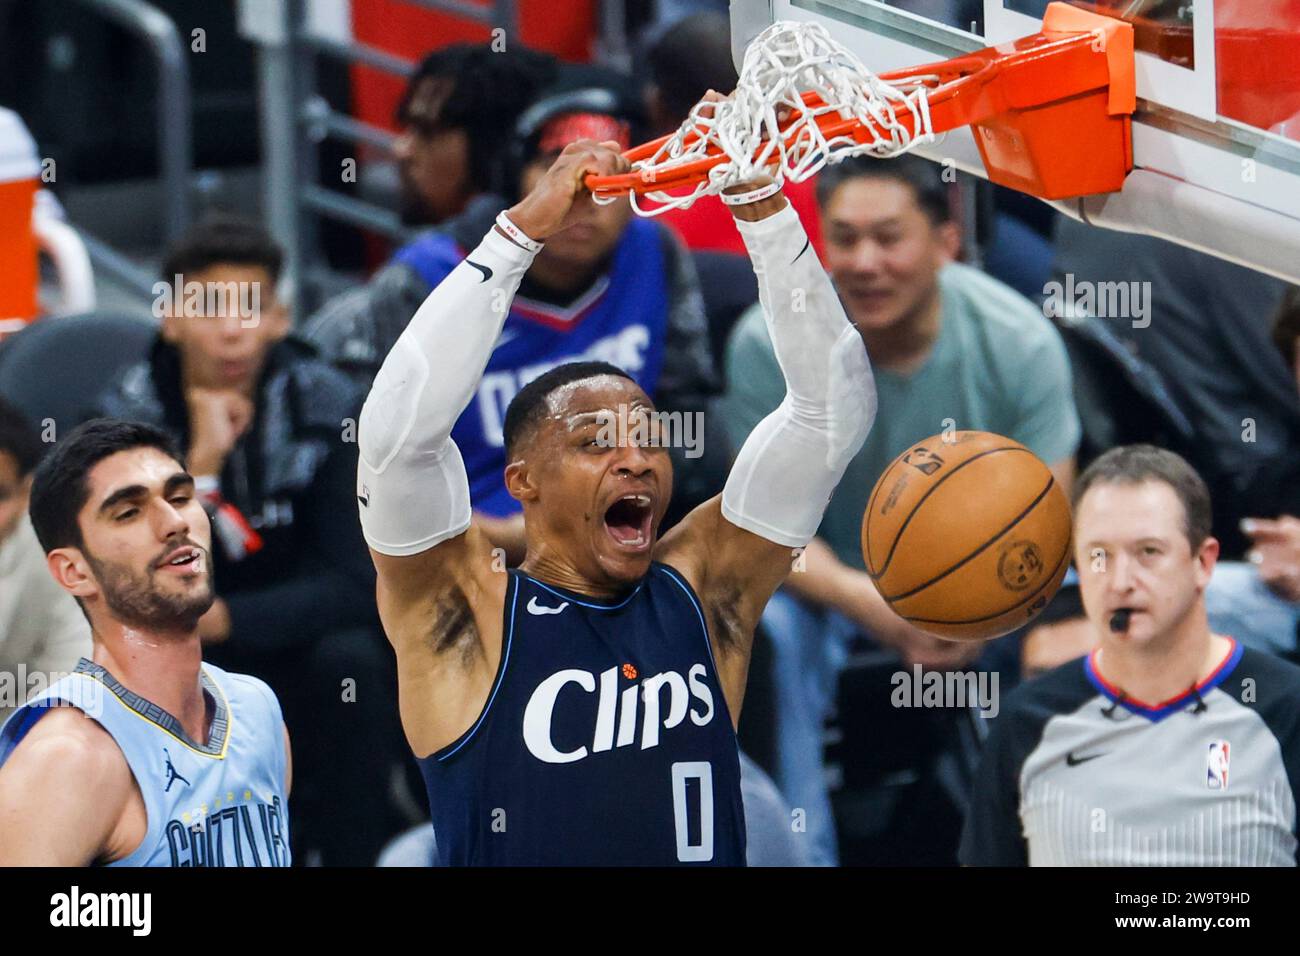 Los Angeles, United States. 29th Dec, 2023. Los Angeles Clippers' Russell Westbrook #0 dunks during the NBA basketball game between Clippers and Grizzlies at Crypto.com Arena. Final score; Clippers 117: 106 Grizzlies. (Photo by Ringo Chiu/SOPA Images/Sipa USA) Credit: Sipa USA/Alamy Live News Stock Photo